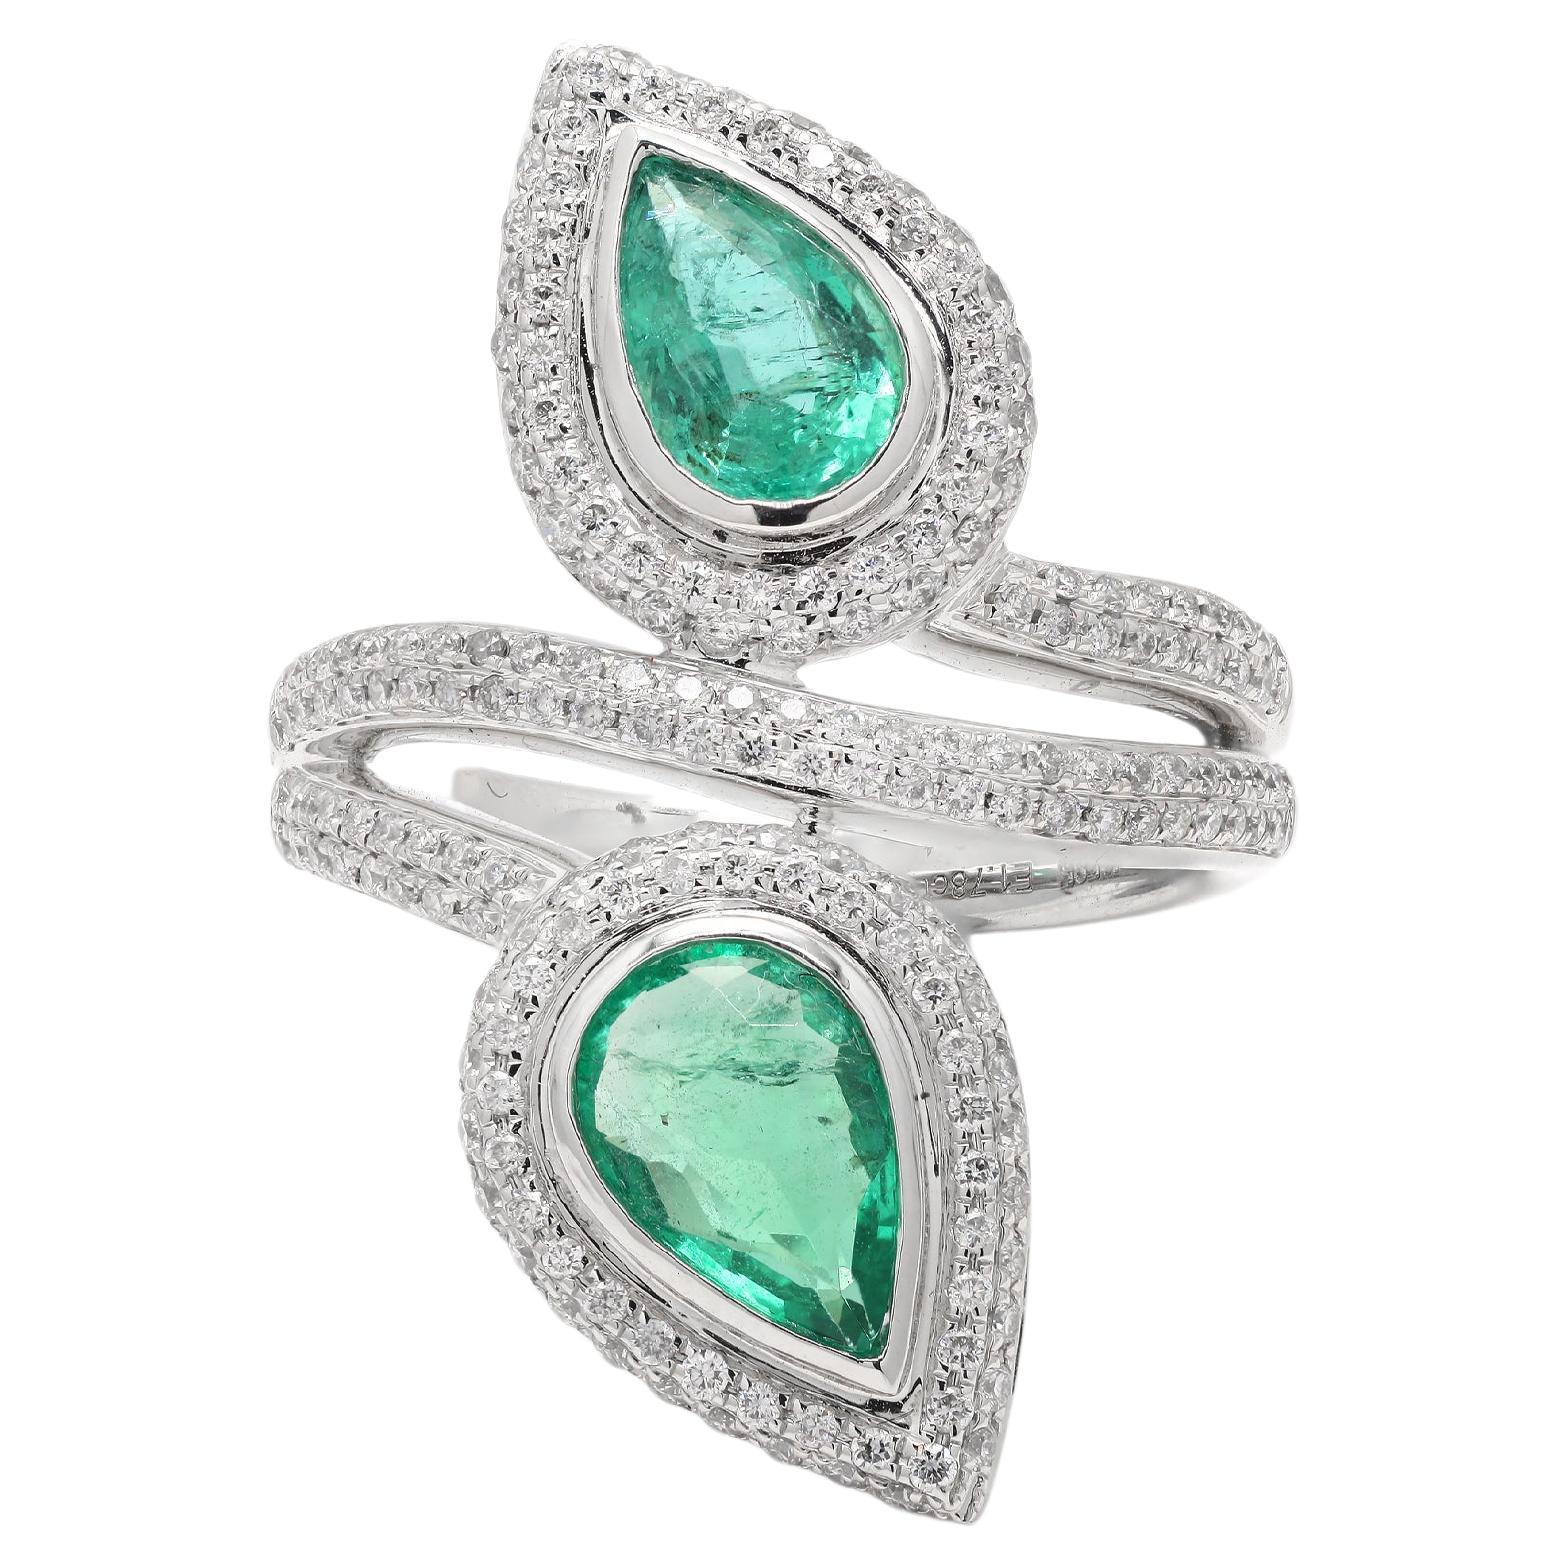 For Sale:  Pear Cut Emerald Cocktail Ring with Diamonds in 14K Solid White Gold